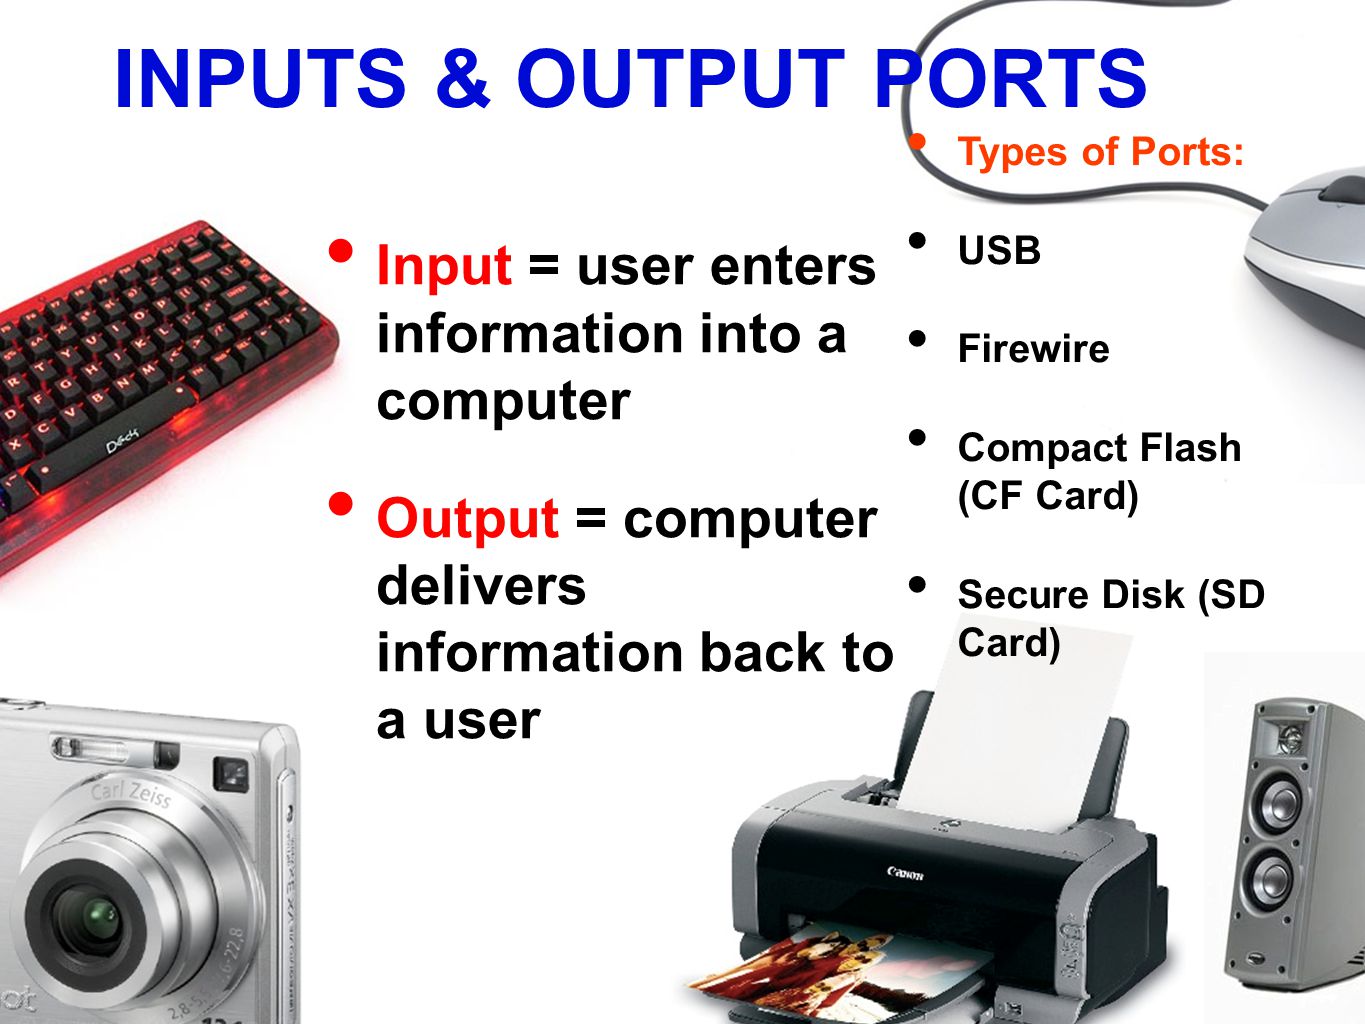 INPUTS & OUTPUT PORTS Input = user enters information into a computer